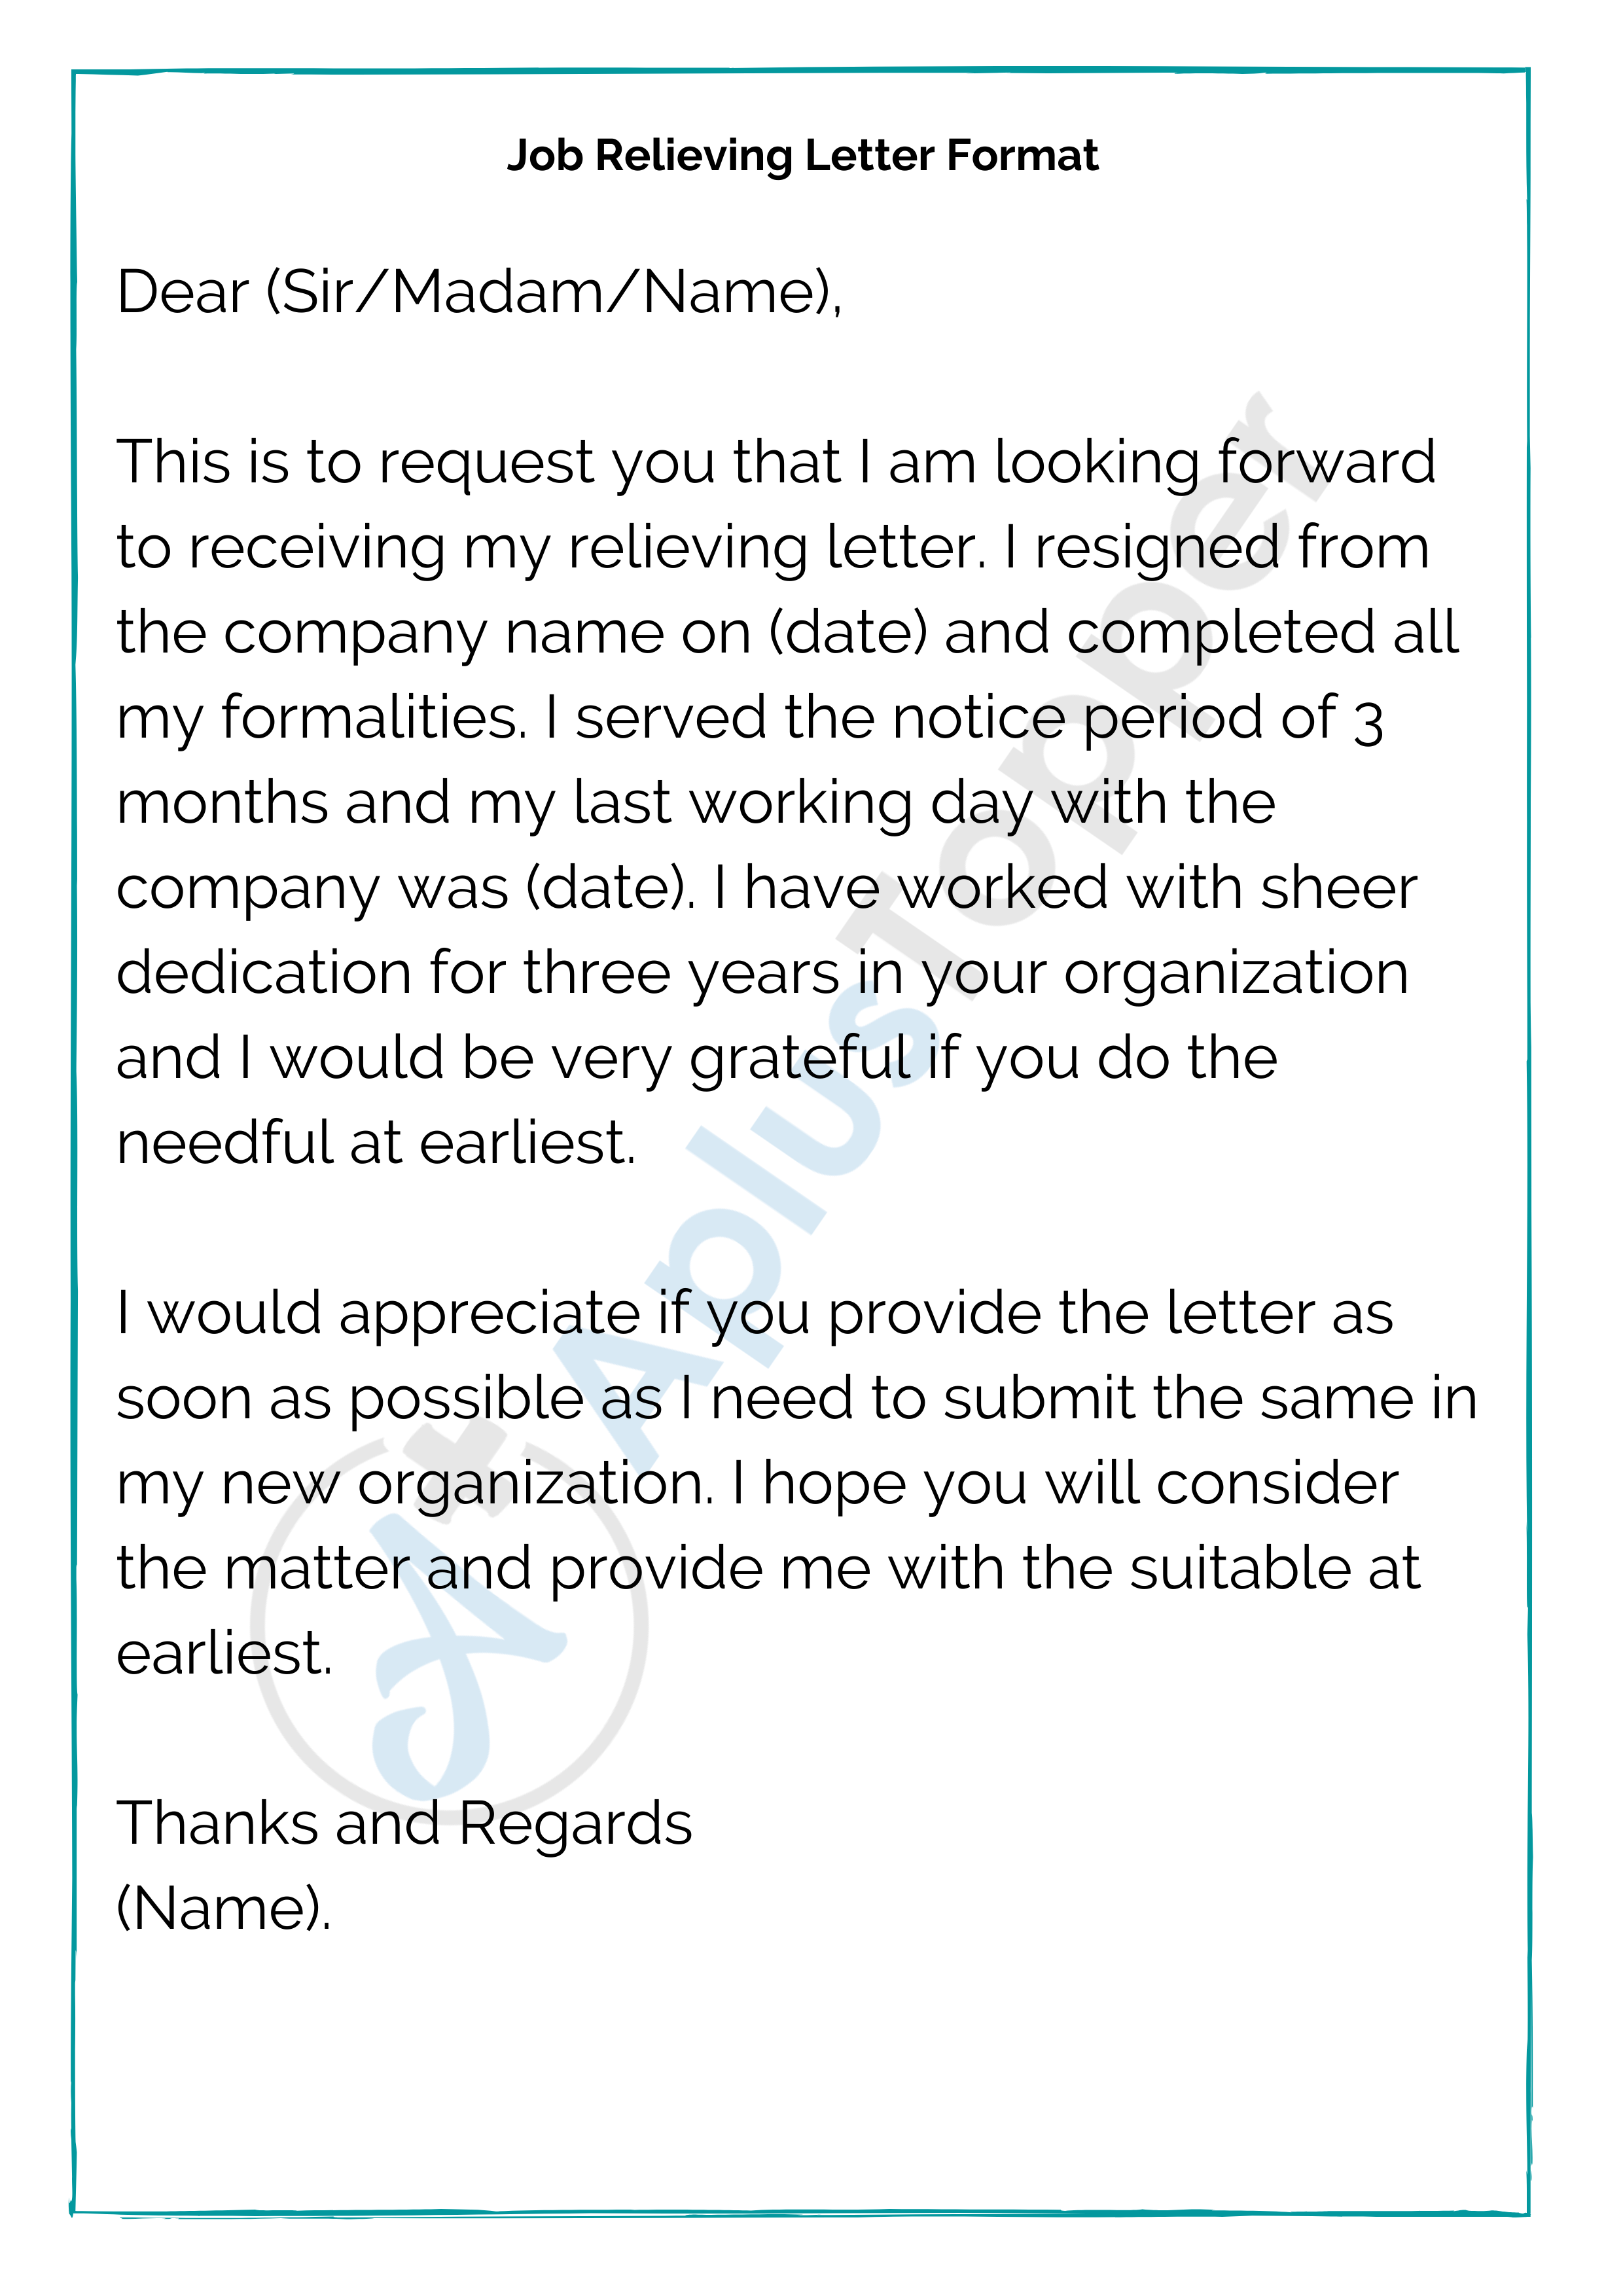 Relieving Letter Format Relieving Letter Format Templates And Samples